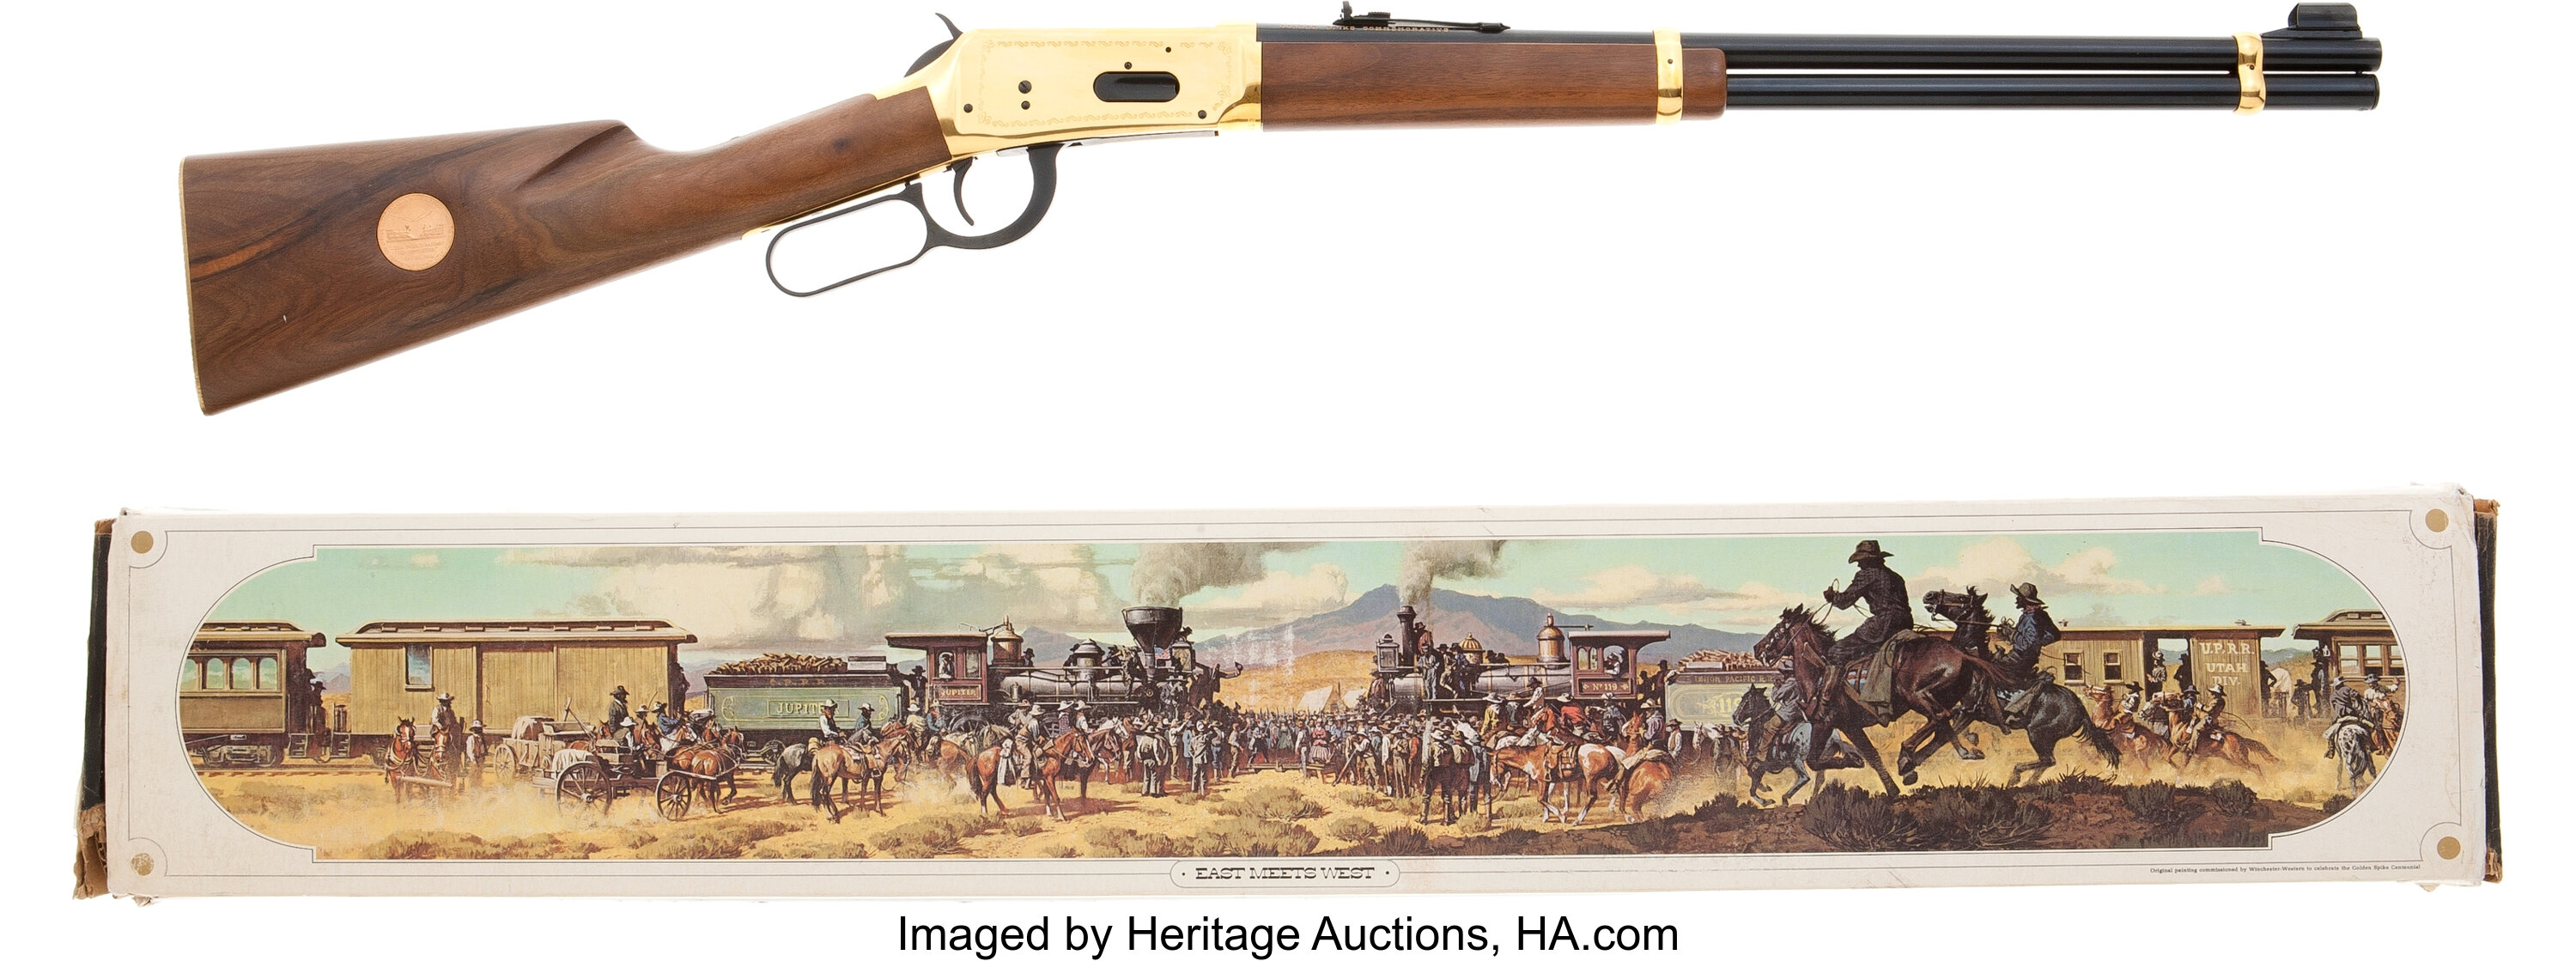 Winchester rifle serial number lookup and pictures